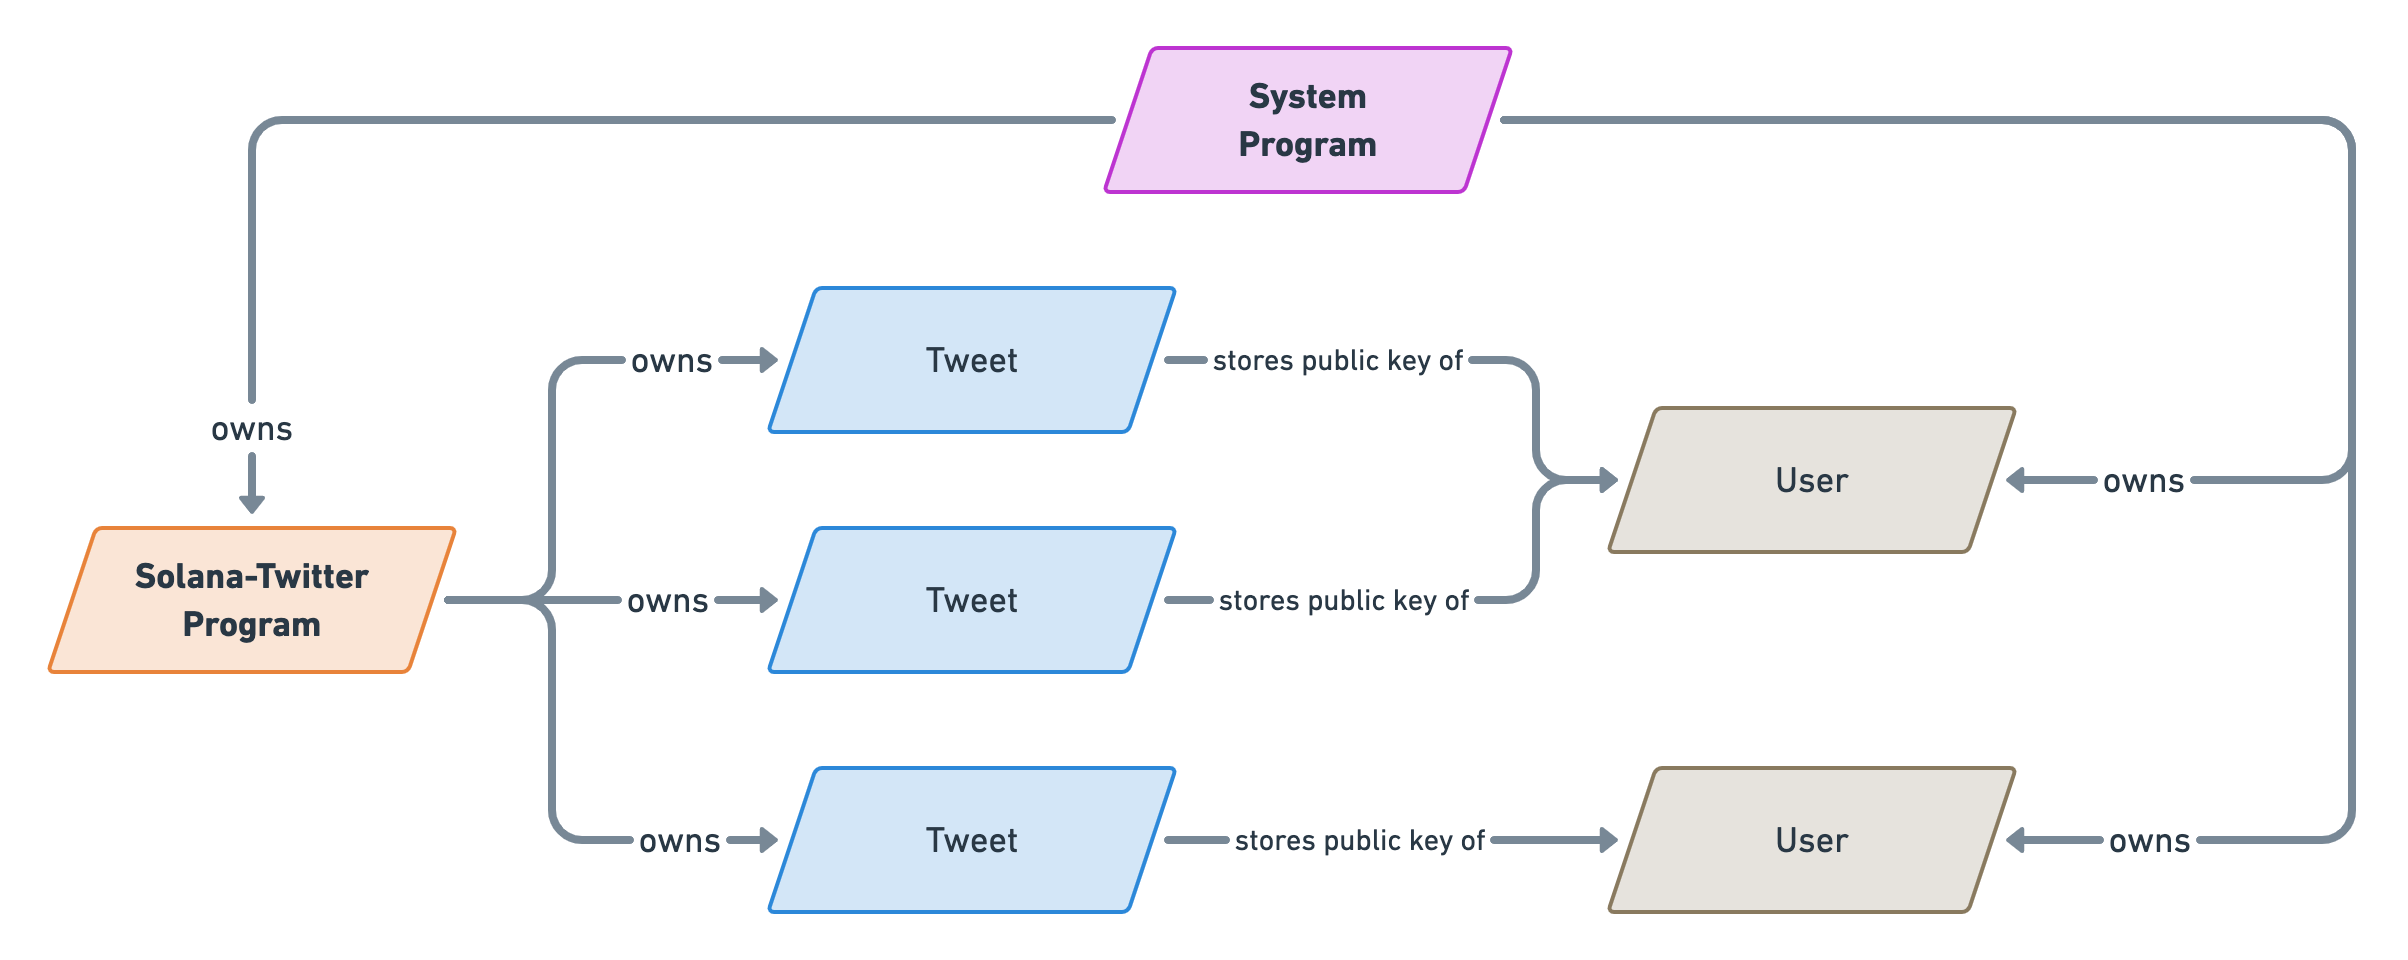 Diagram showing that: the "System Program" executable account owns our "Solana-Twitter" executable account which itself owns 3 "Tweet" accounts. Each of these accounts stores the public key of a "User" account which are owned by the "System Program" as well.